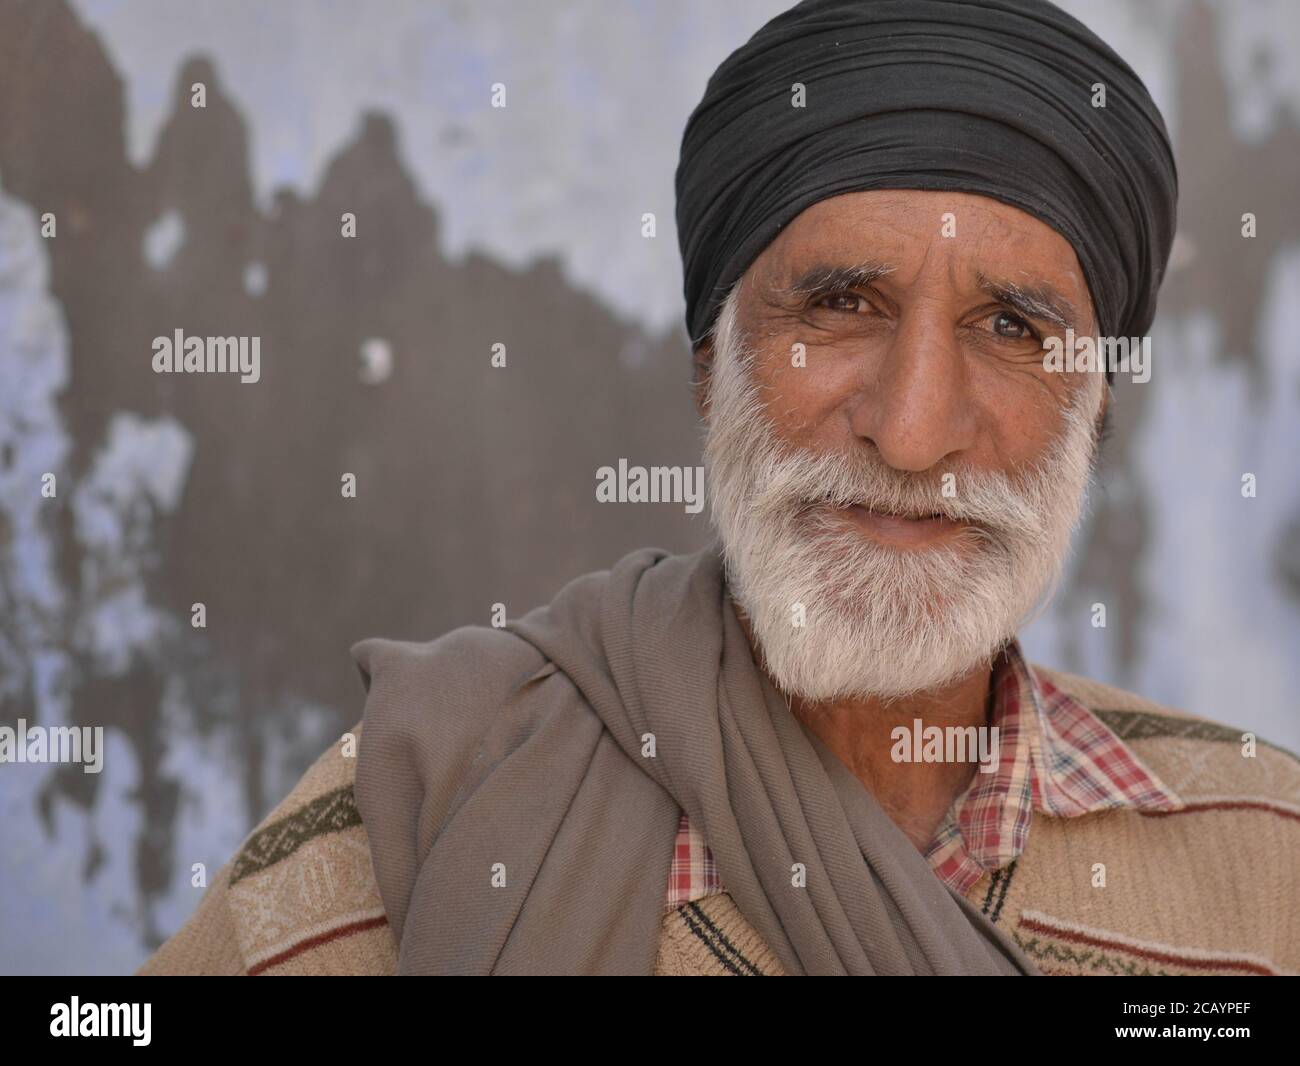 Elderly Indian Sikh man with black turban (dastar) poses for the camera. Stock Photo